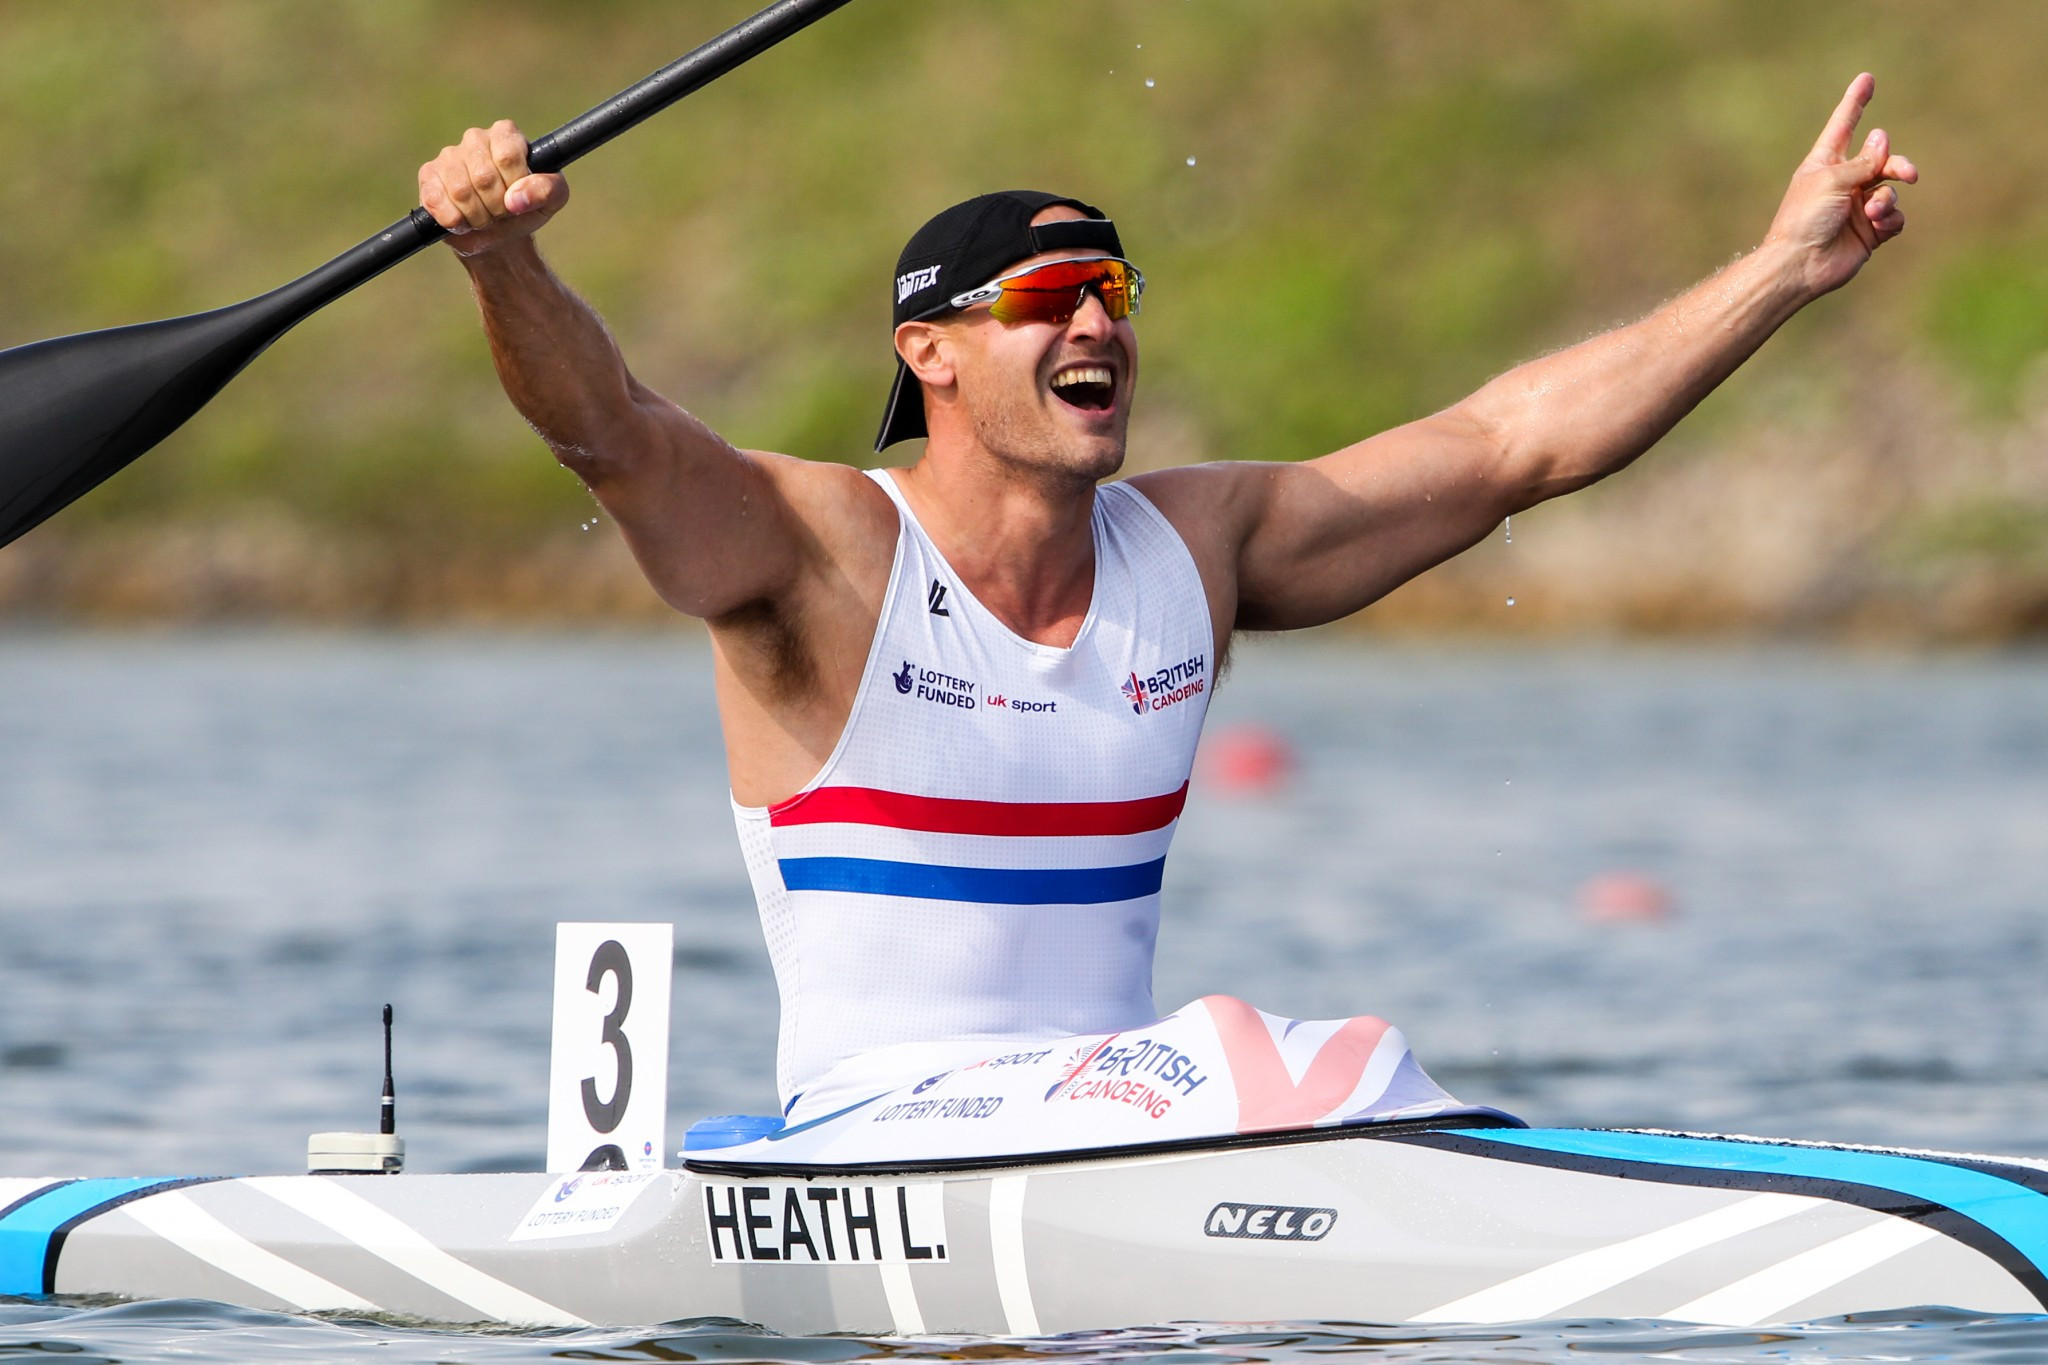 Heath completes clean sweep of major titles at ICF Canoe Sprint World Championships